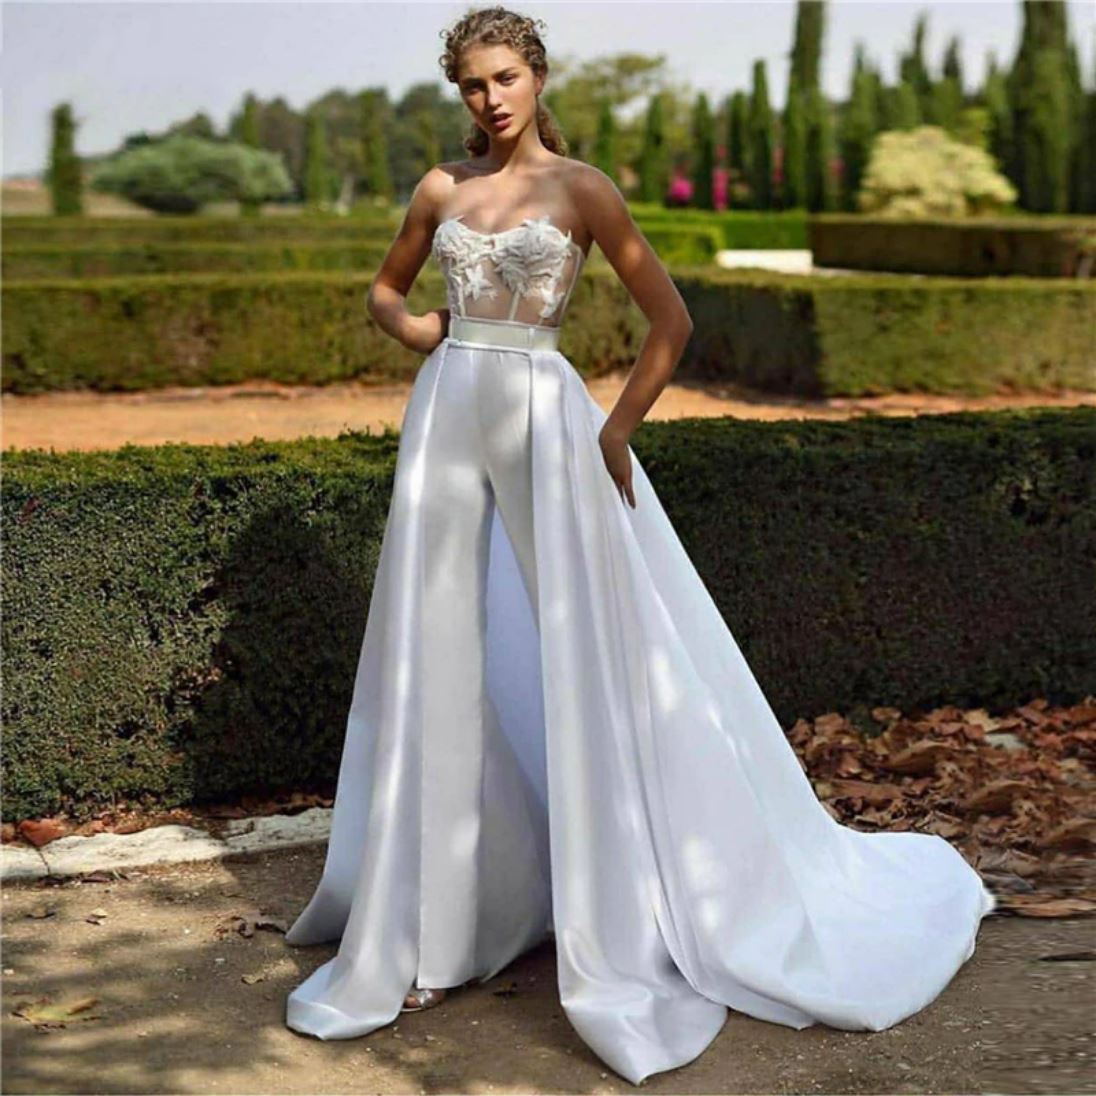 Satin Pants Sleeveless Jumpsuit With Detachable Train Bridal Gown Sexy Wedding Dresses BlissGown 